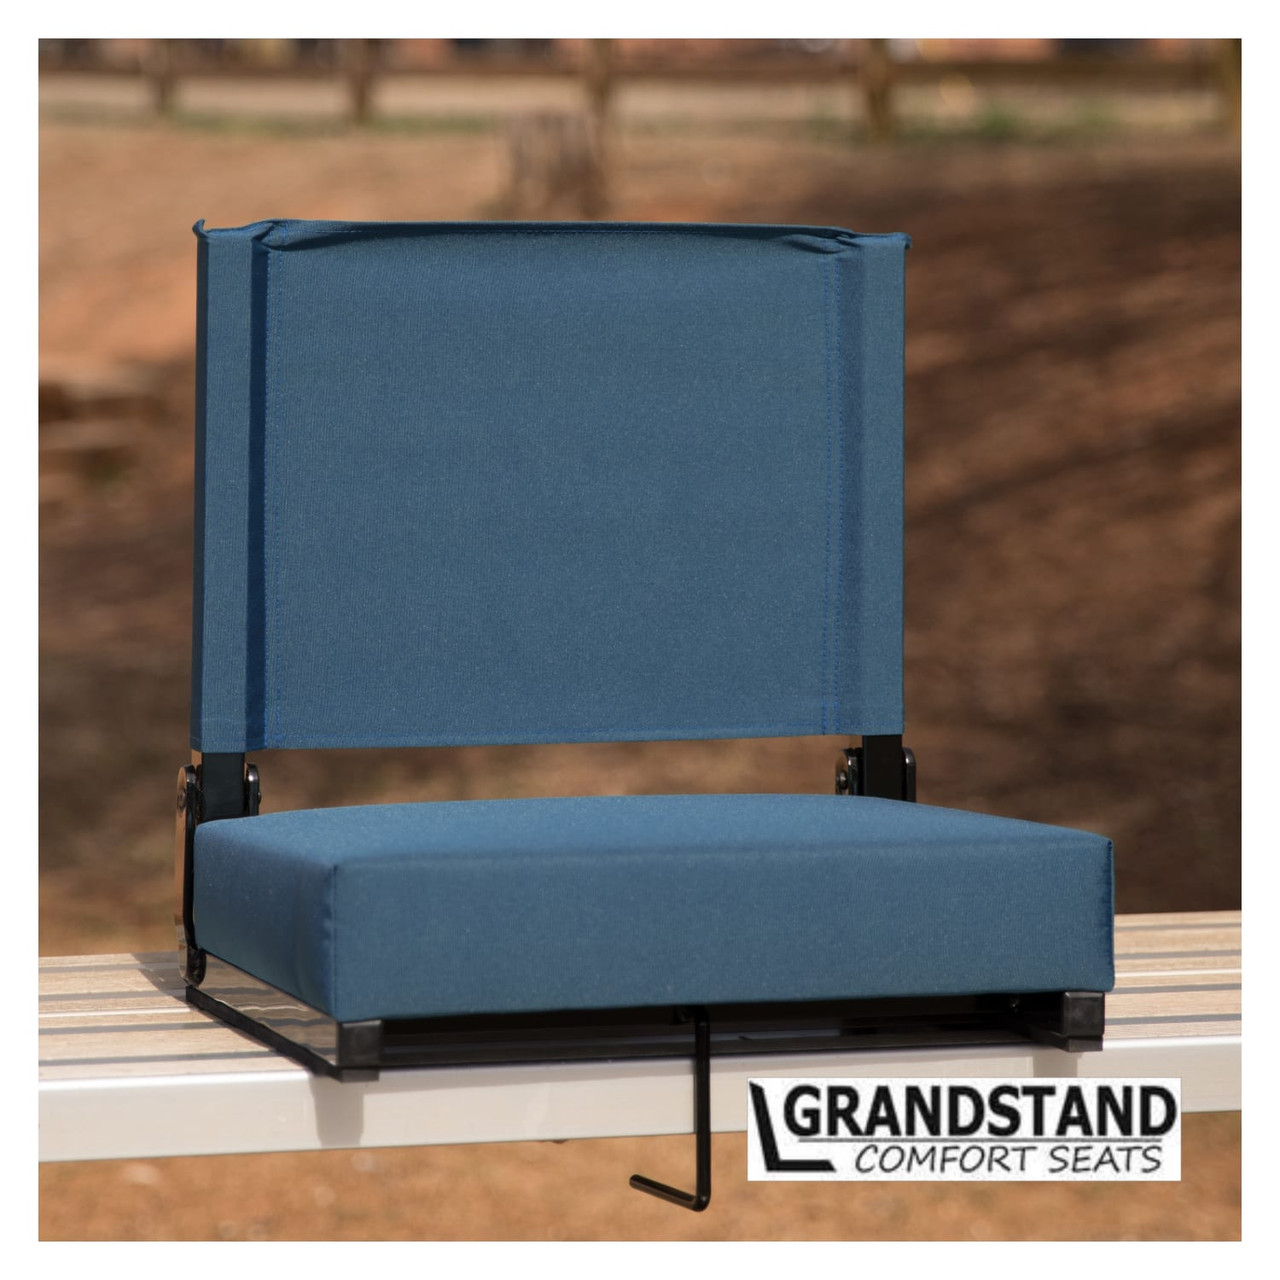 Set of 2 Grandstand Comfort Seats by Flash - Lightweight Stadium Chair with Handle & Ultra-Padded Seat, Teal